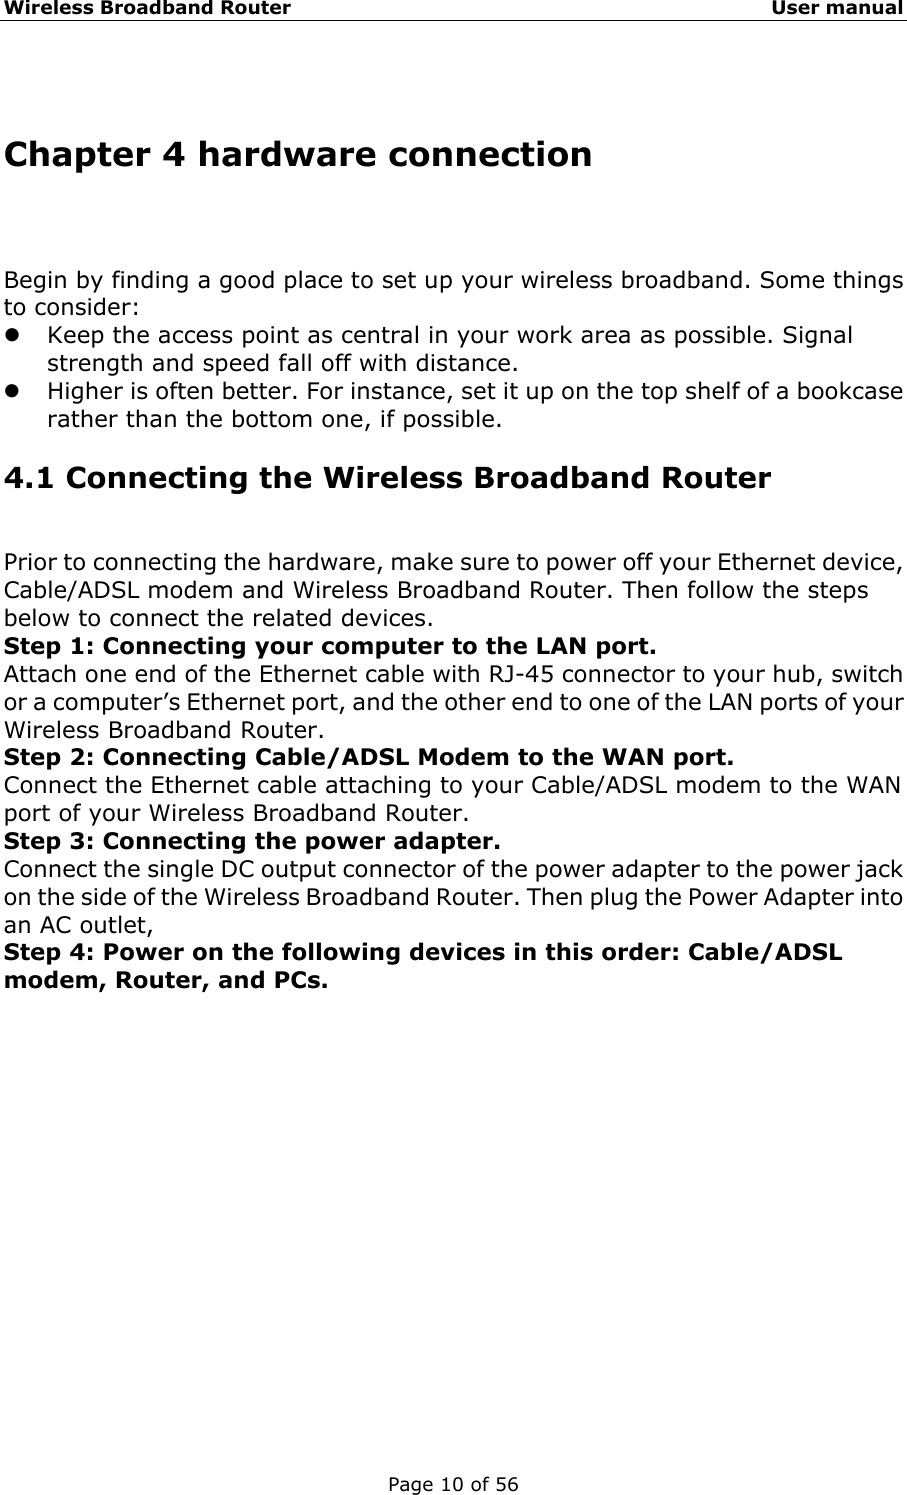 Wireless Broadband Router                                                   User manual Page 10 of 56  Chapter 4 hardware connection Begin by finding a good place to set up your wireless broadband. Some things to consider:   z Keep the access point as central in your work area as possible. Signal strength and speed fall off with distance.   z Higher is often better. For instance, set it up on the top shelf of a bookcase rather than the bottom one, if possible. 4.1 Connecting the Wireless Broadband Router Prior to connecting the hardware, make sure to power off your Ethernet device, Cable/ADSL modem and Wireless Broadband Router. Then follow the steps below to connect the related devices. Step 1: Connecting your computer to the LAN port. Attach one end of the Ethernet cable with RJ-45 connector to your hub, switch or a computer’s Ethernet port, and the other end to one of the LAN ports of your Wireless Broadband Router. Step 2: Connecting Cable/ADSL Modem to the WAN port. Connect the Ethernet cable attaching to your Cable/ADSL modem to the WAN port of your Wireless Broadband Router. Step 3: Connecting the power adapter. Connect the single DC output connector of the power adapter to the power jack on the side of the Wireless Broadband Router. Then plug the Power Adapter into an AC outlet, Step 4: Power on the following devices in this order: Cable/ADSL modem, Router, and PCs.            